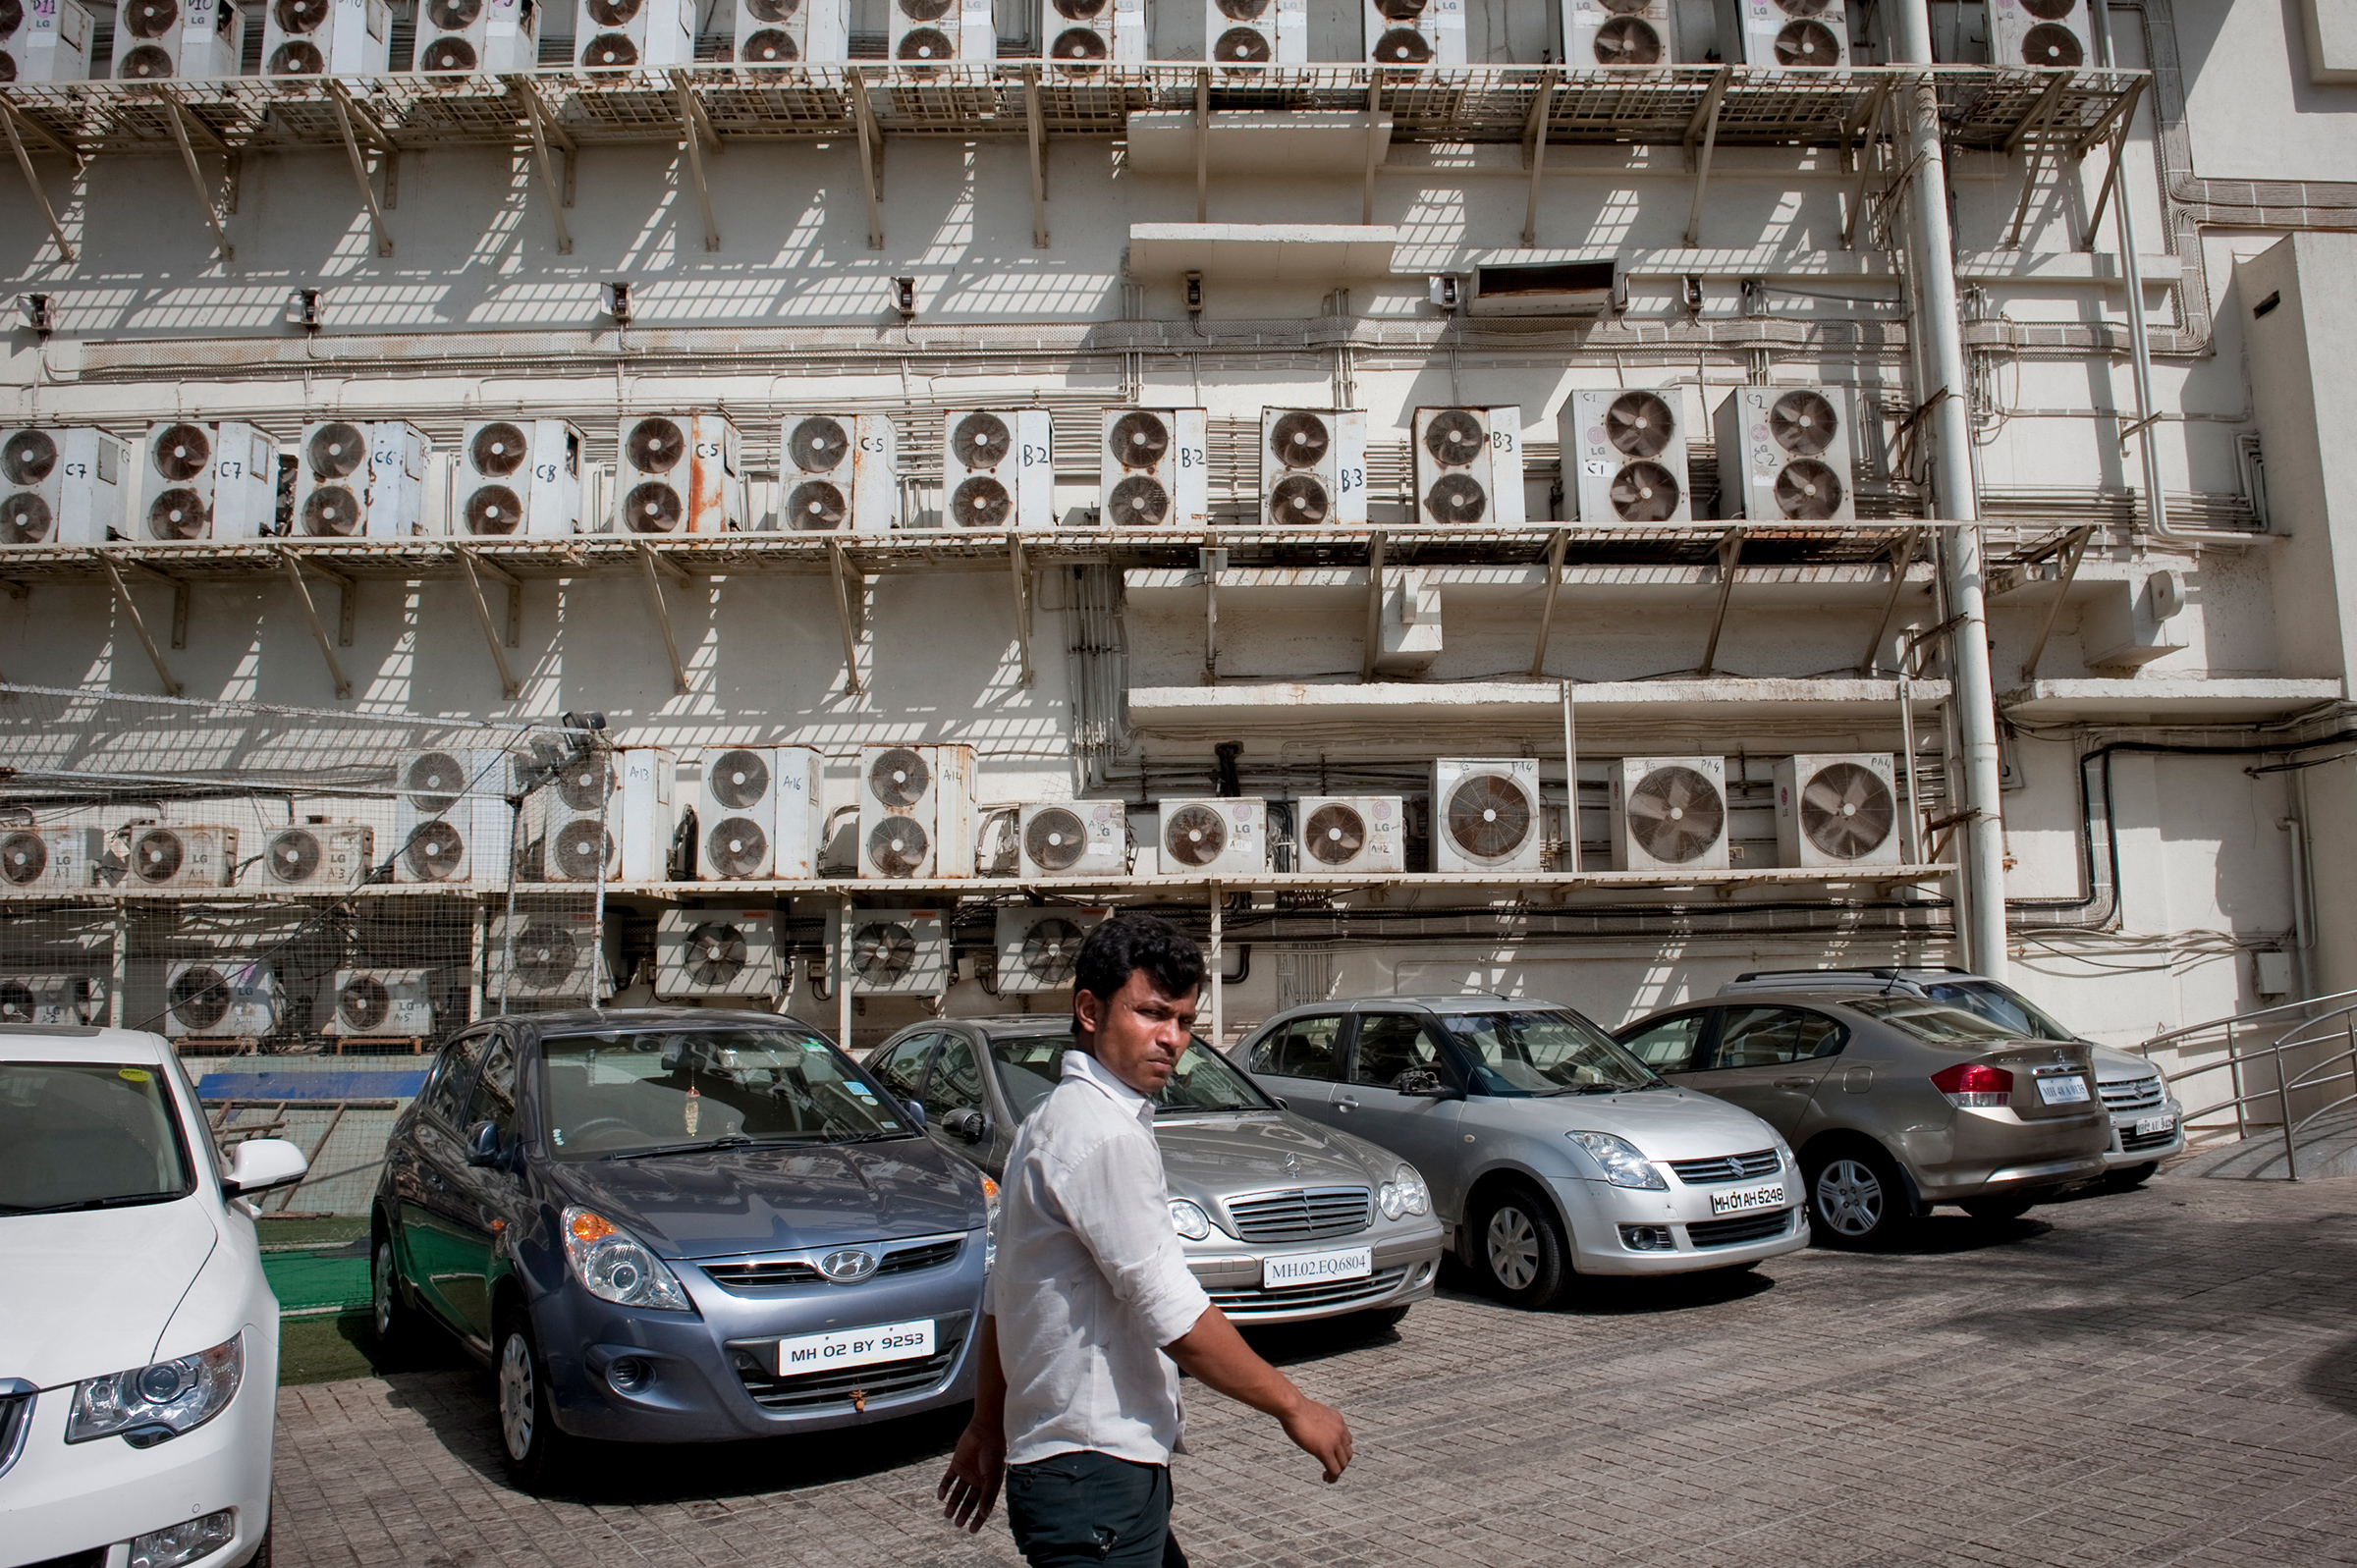 Air conditioning units installed outside of a shopping mall in Mumbai in May 2012.